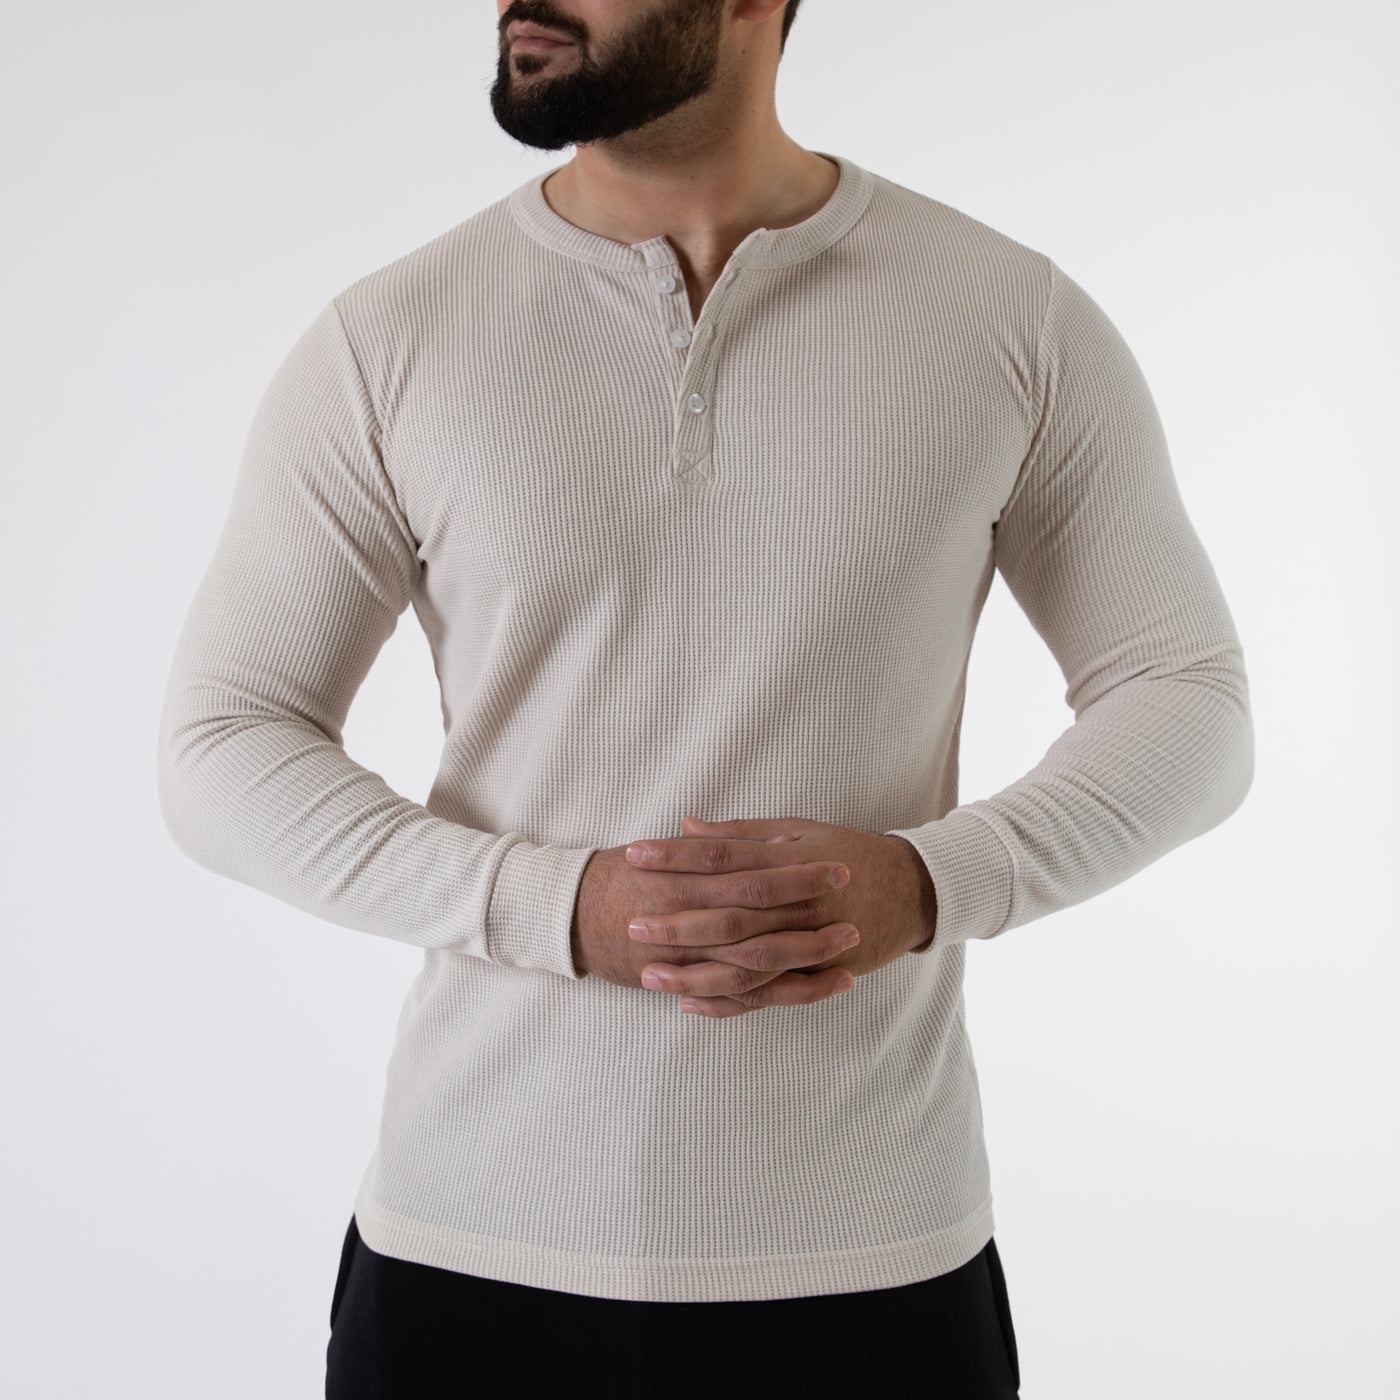 Off-White Thermal Waffle-Knit Henley